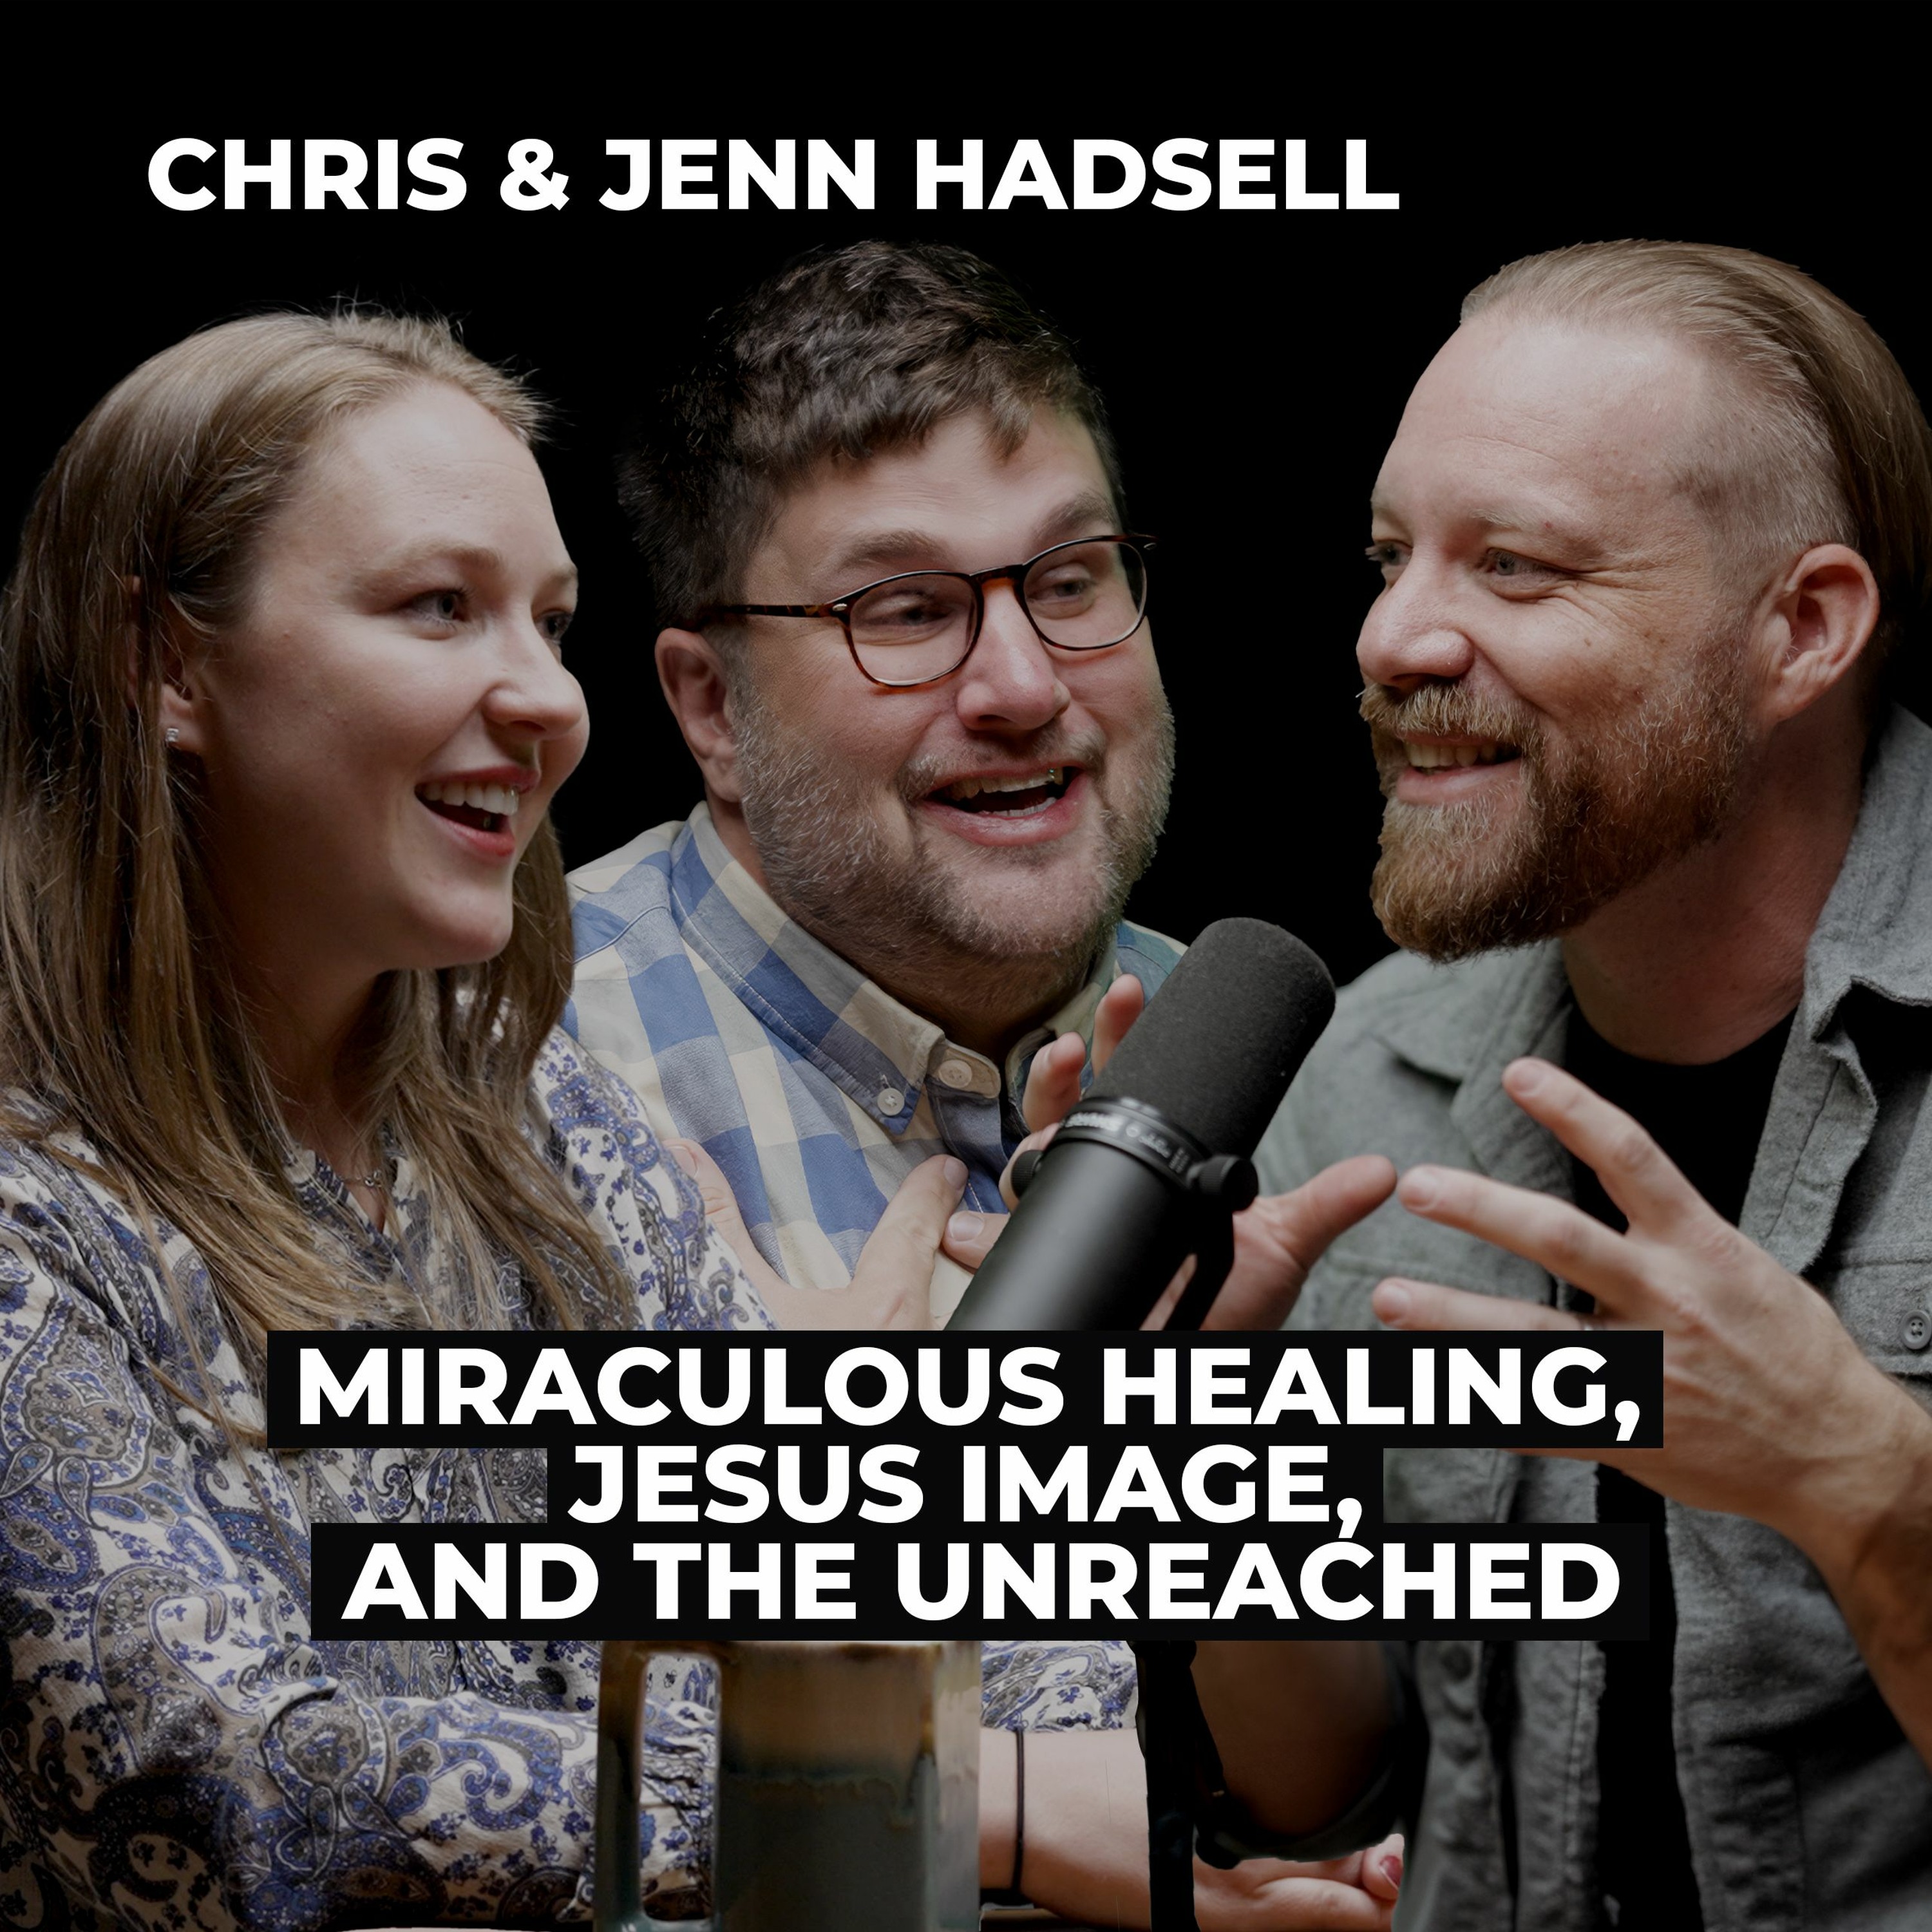 Chris & Jenn Hadsell: Miraculous Healing, Jesus Image, and the Unreached